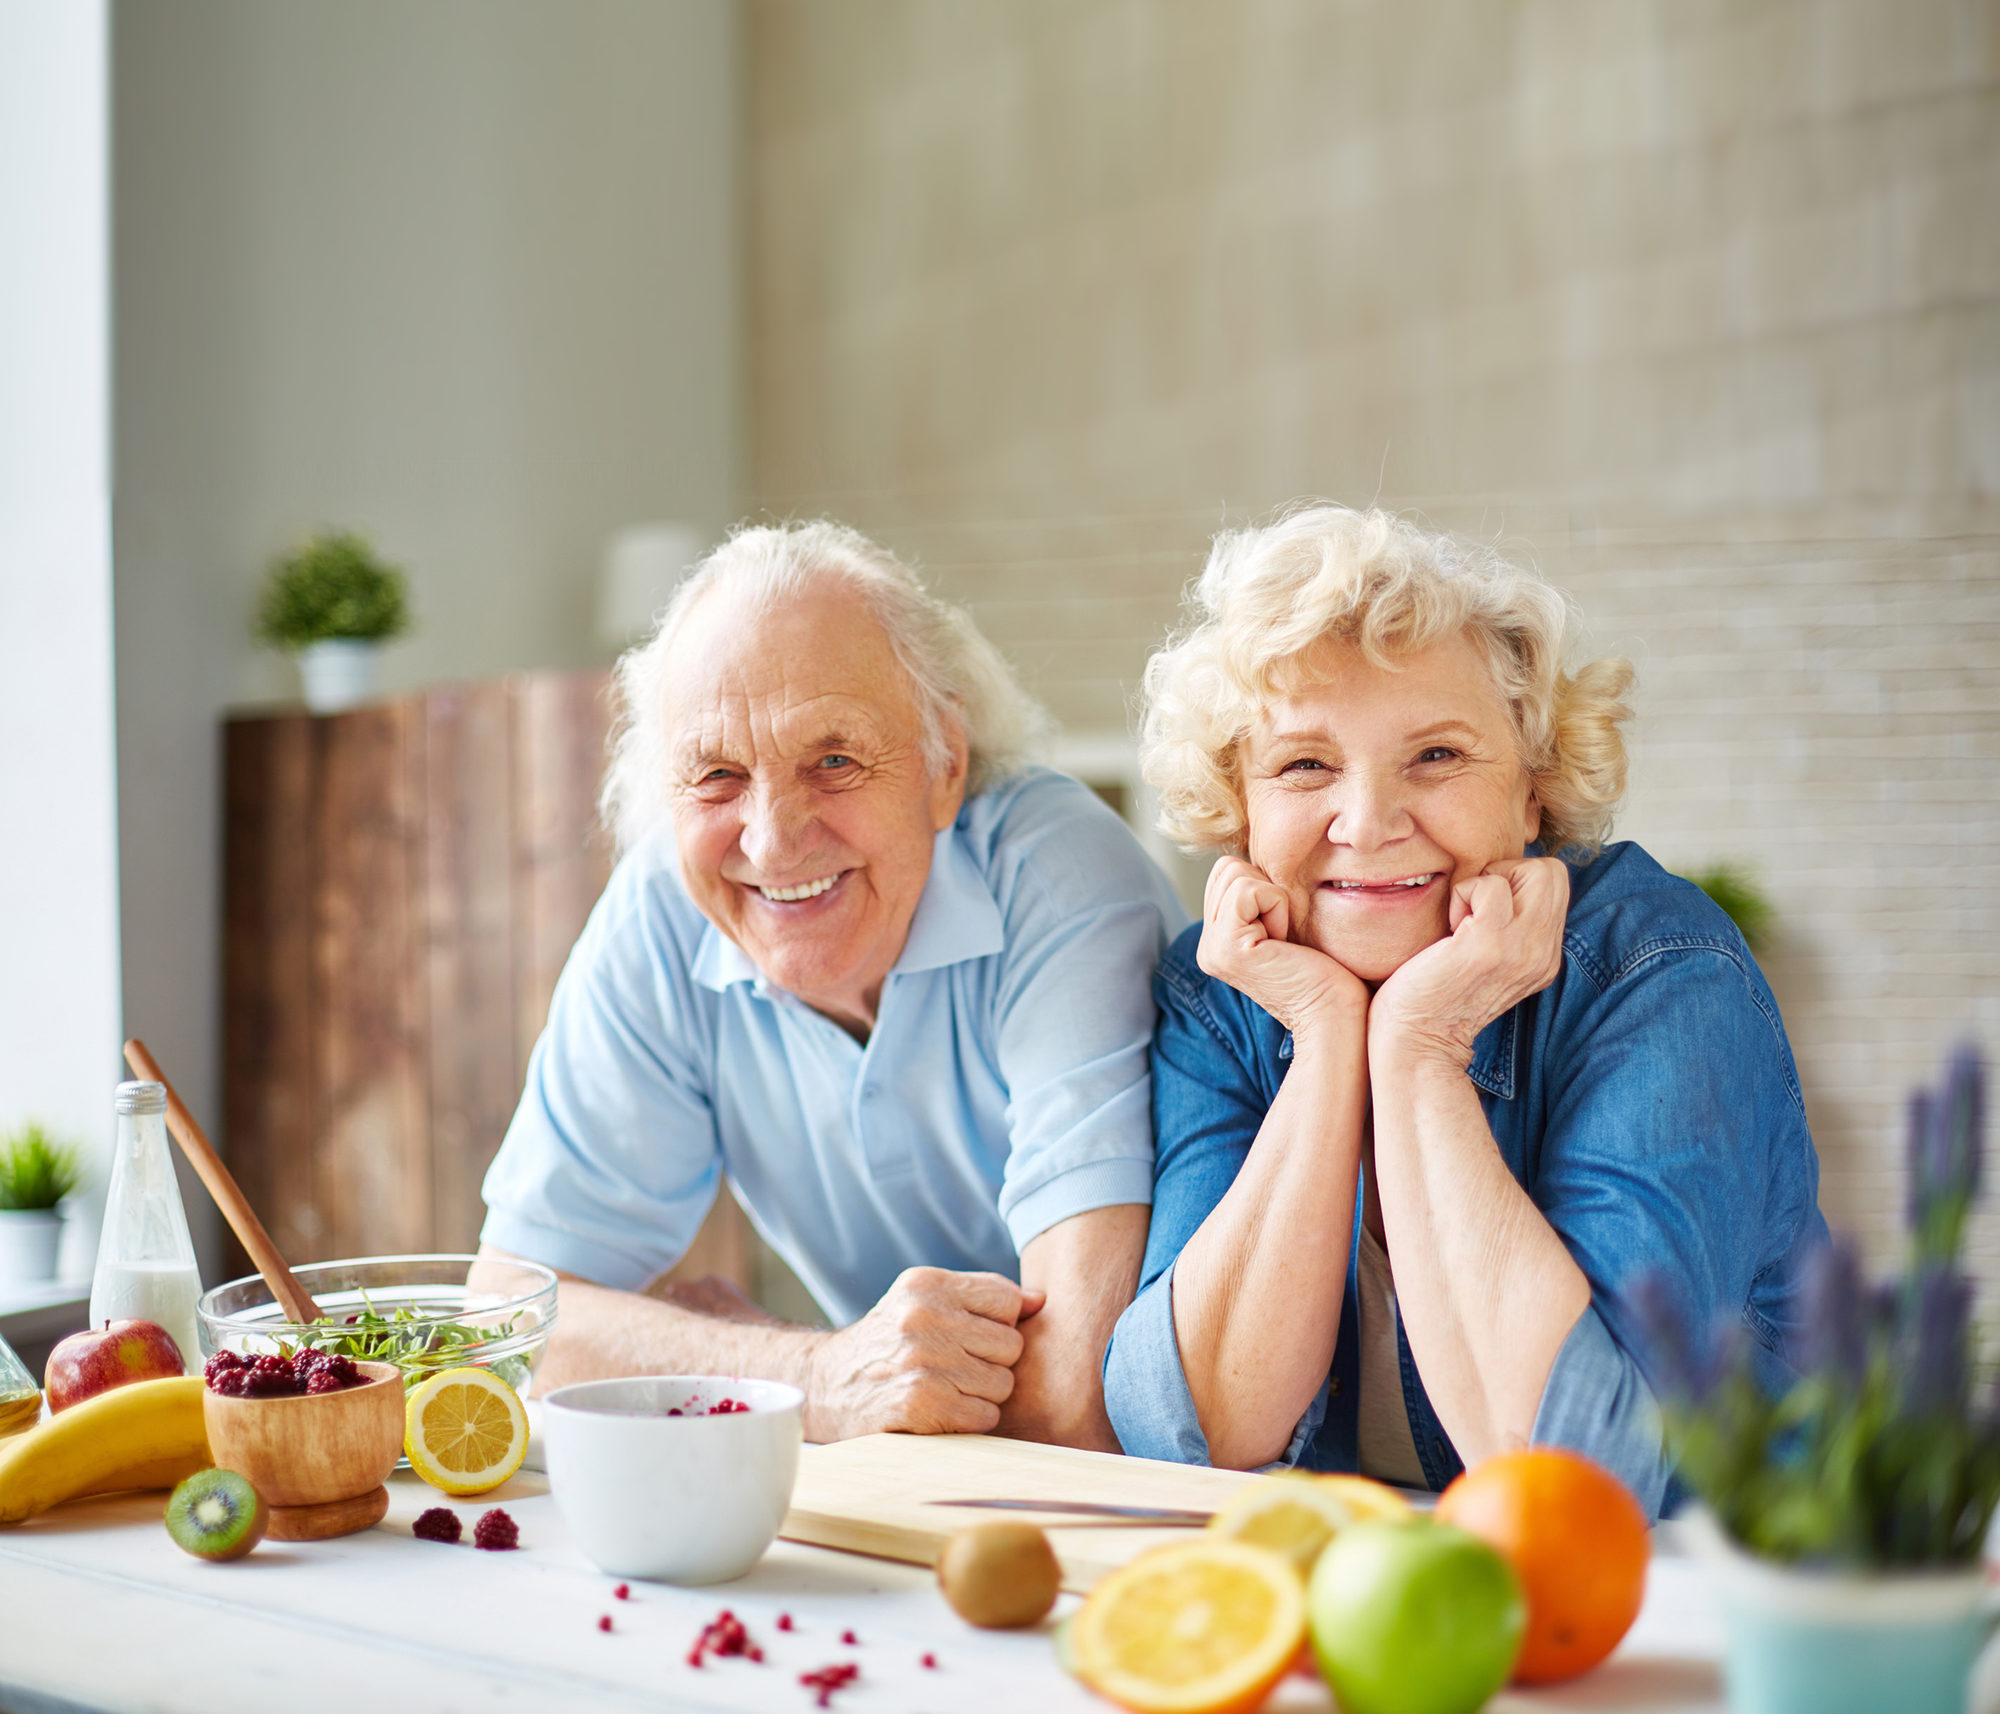 Looking For Senior Dating Online Service No Fee